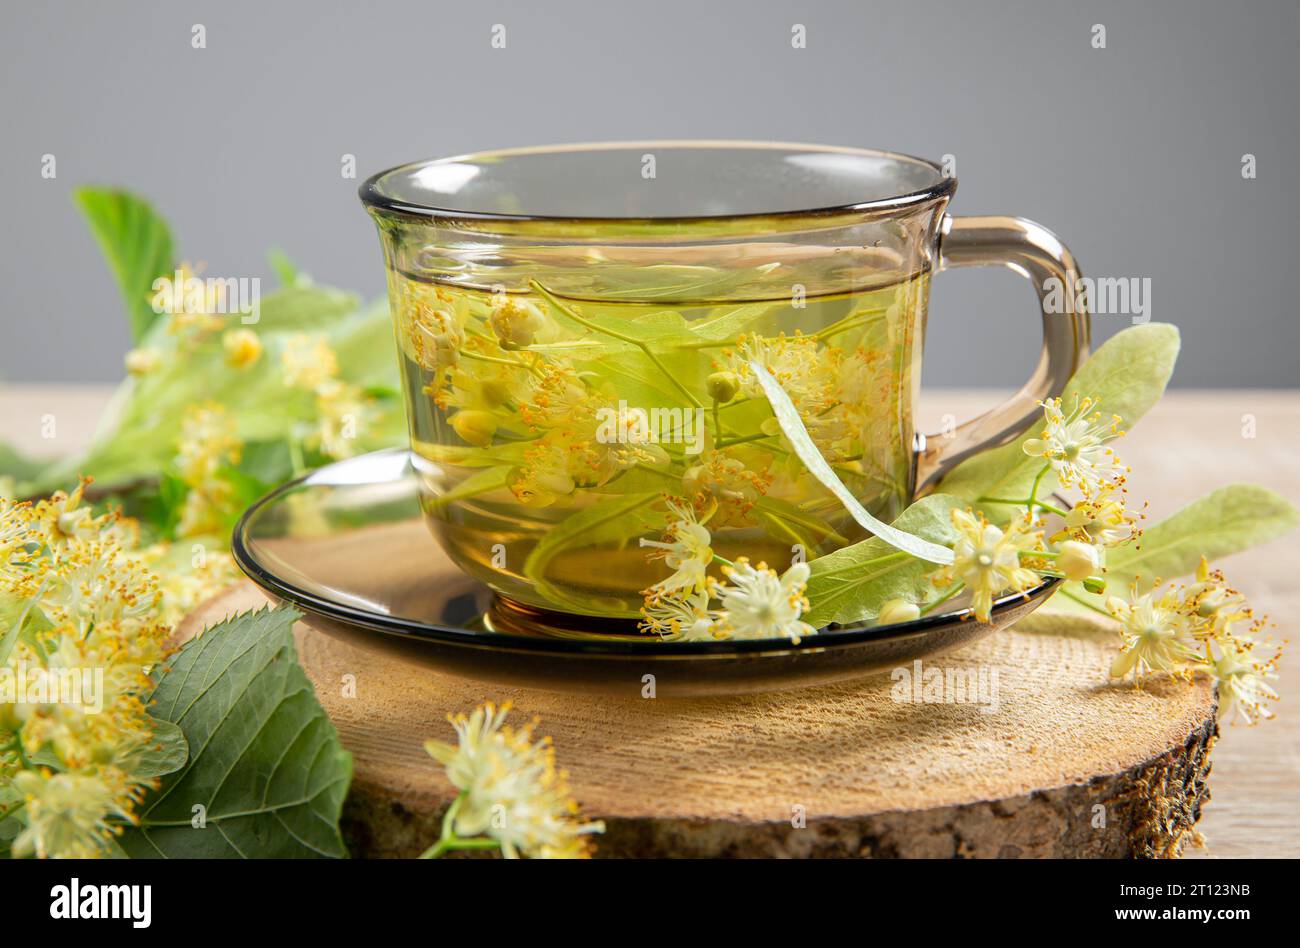 Tilia platyphyllos known as large-leaved linden herbal tea made out of an freshly picked blossoms with tree leaves and branches with blossoms. Stock Photo